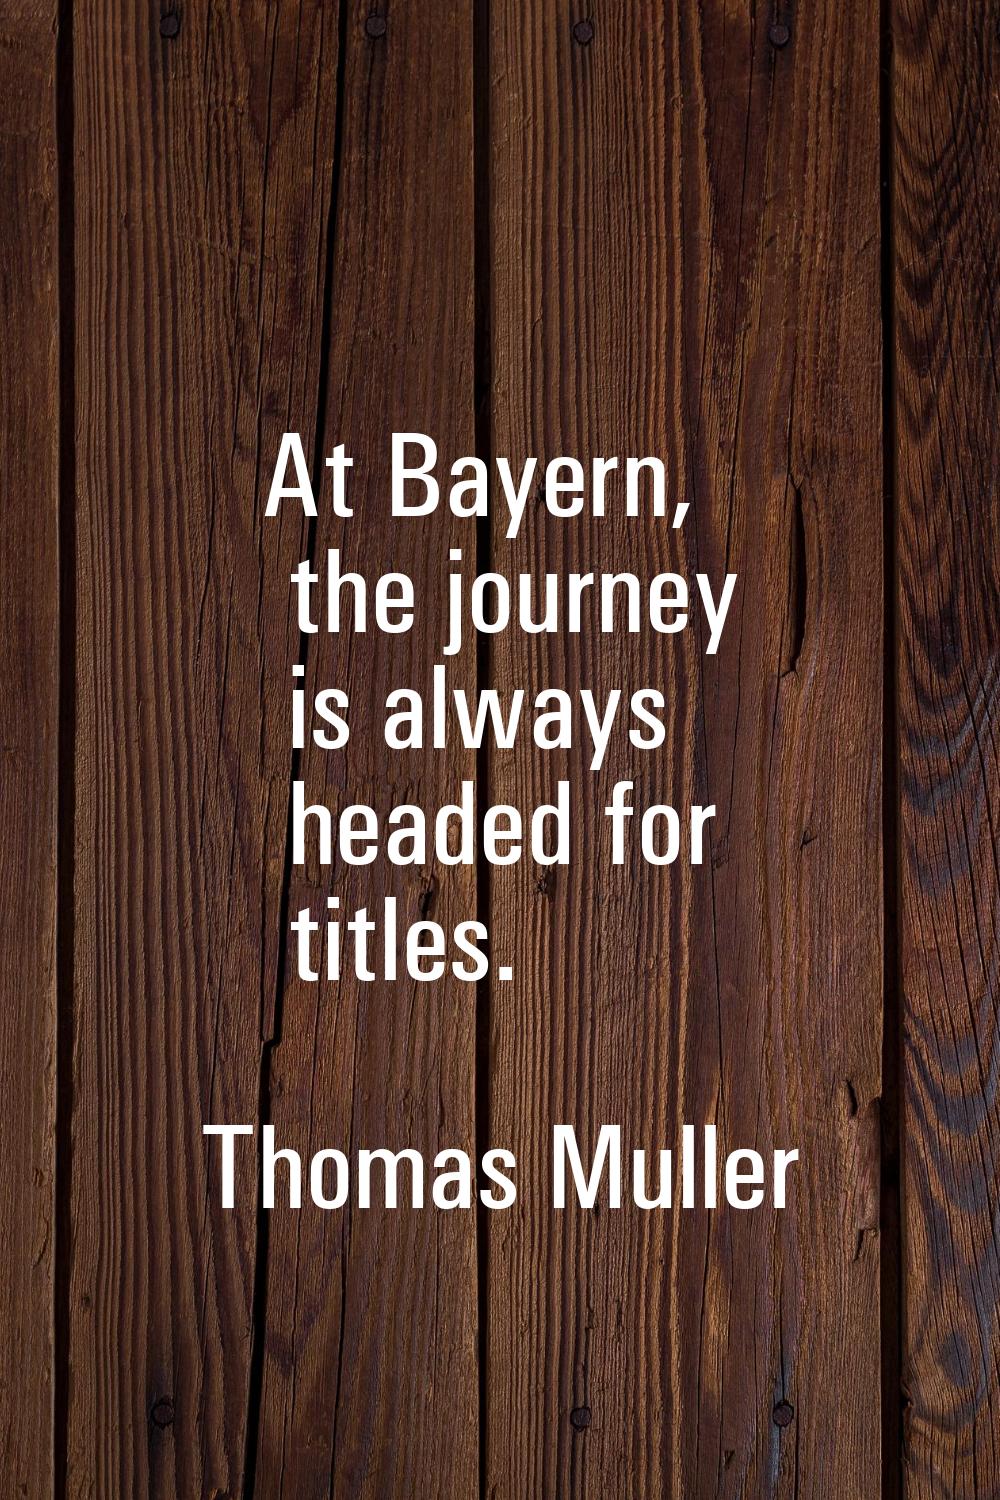 At Bayern, the journey is always headed for titles.